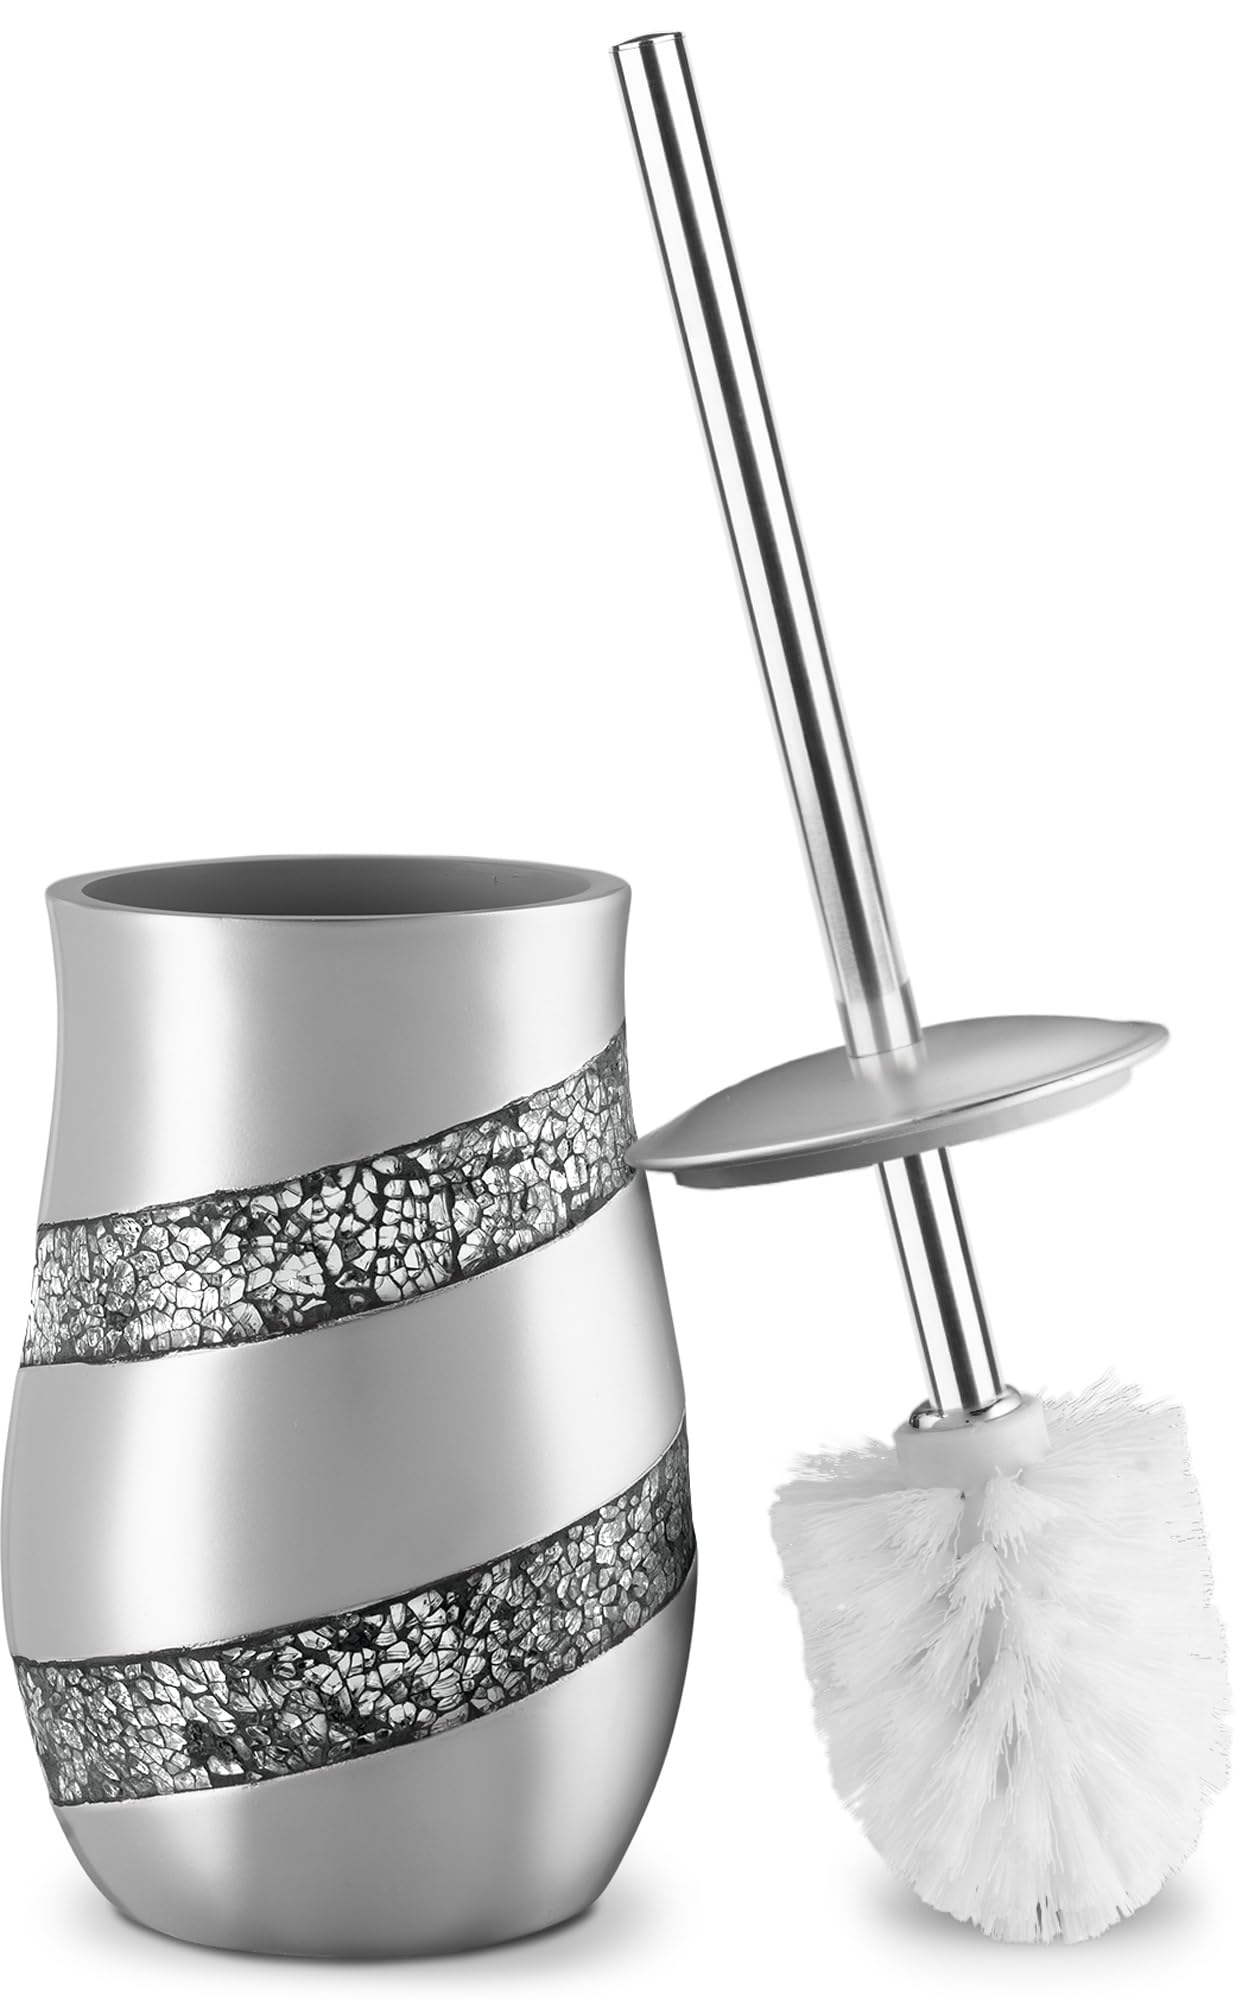 Creative Scents Toilet Brush and Holder Set - Silver Mosaic Toilet Bowl Brush and Holder, Toilet Cleaner Brush with Sturdy Stainless Steel Handle, Bathroom Toilet Scrubber Brush with Decorative Holder  - Like New